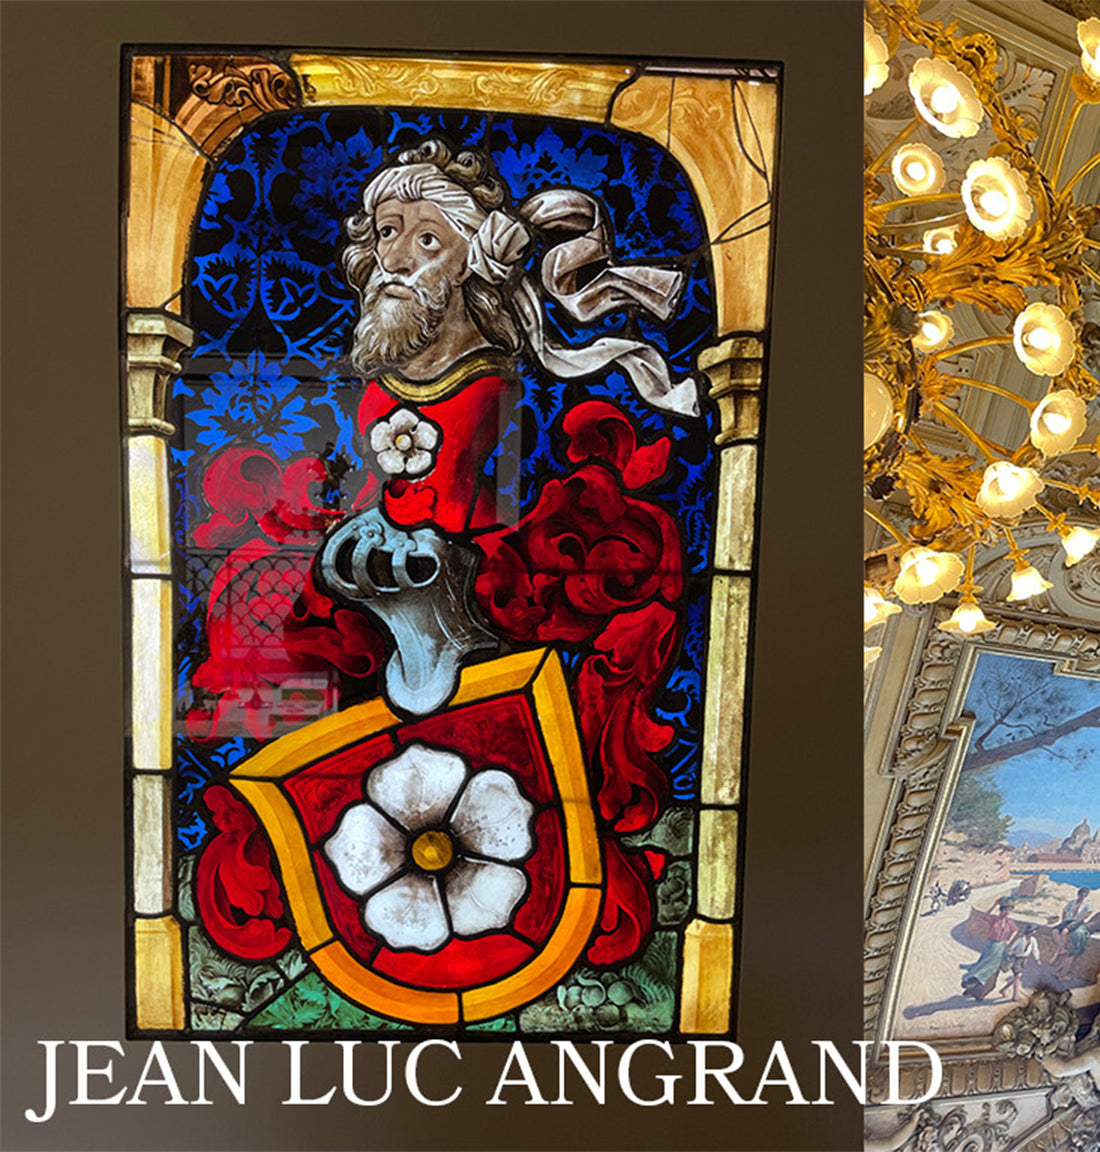 Interview with Jean Luc Angrand by Cindy  Dupuis (student journalist)